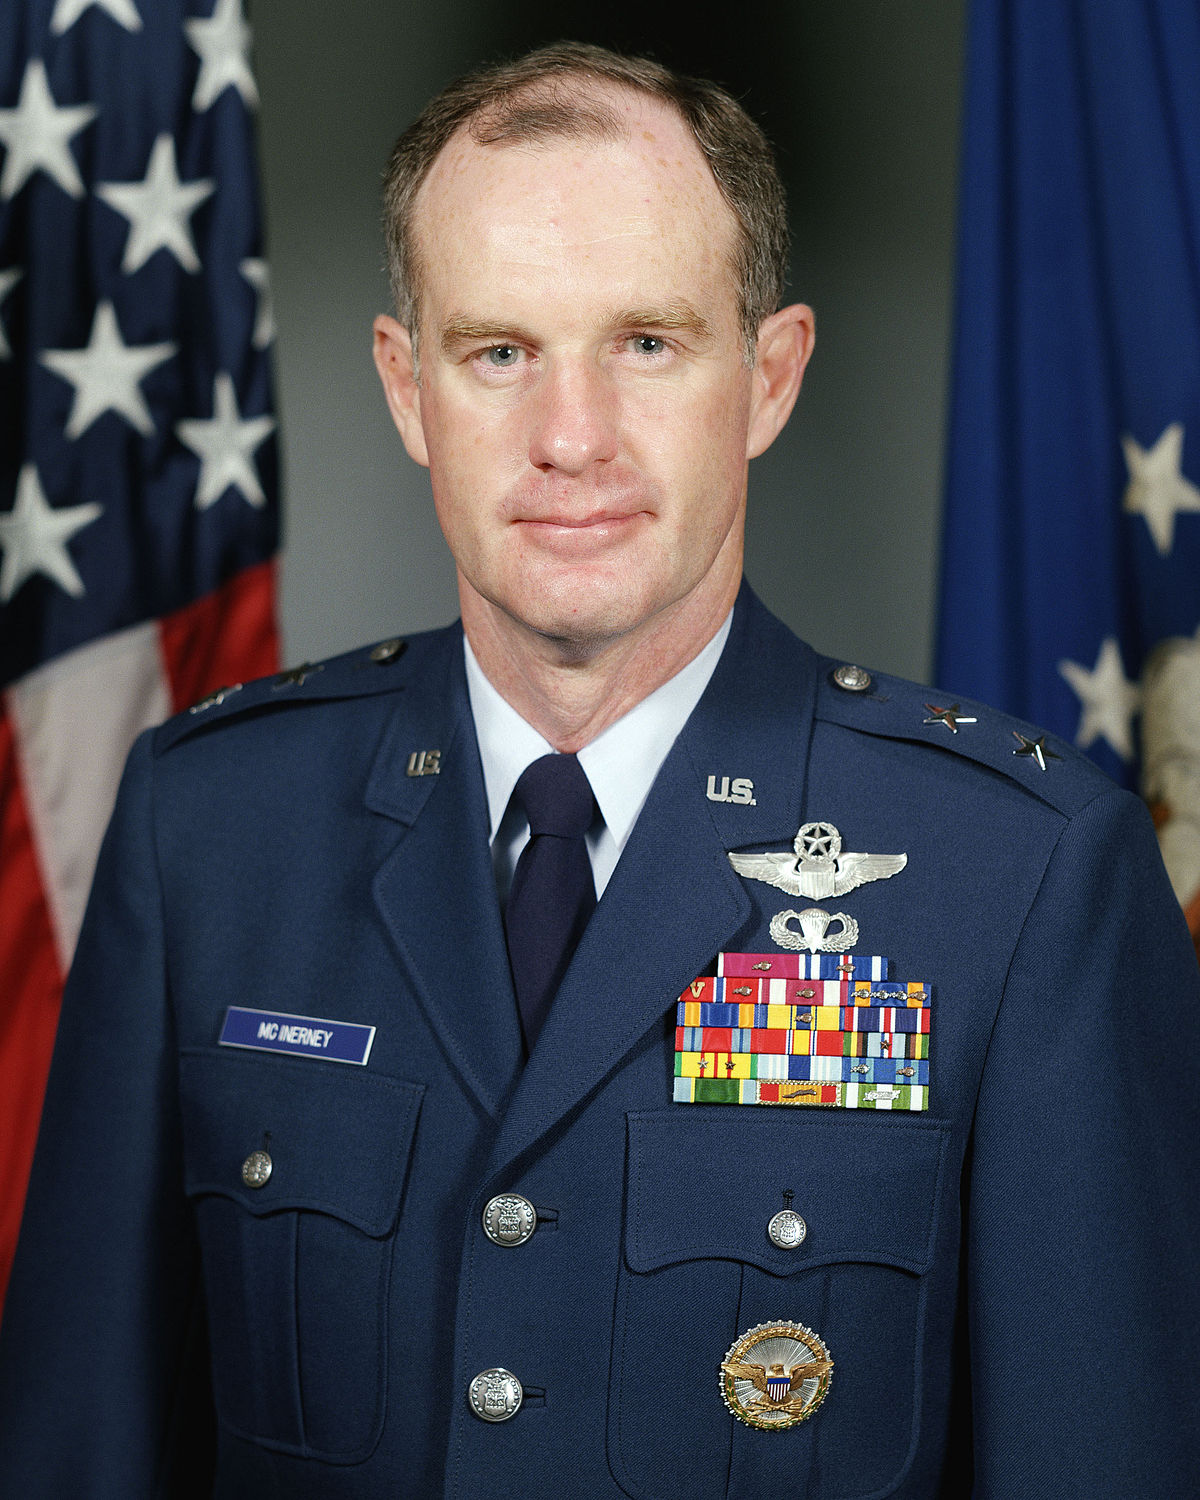 General of the Air Force - Wikipedia